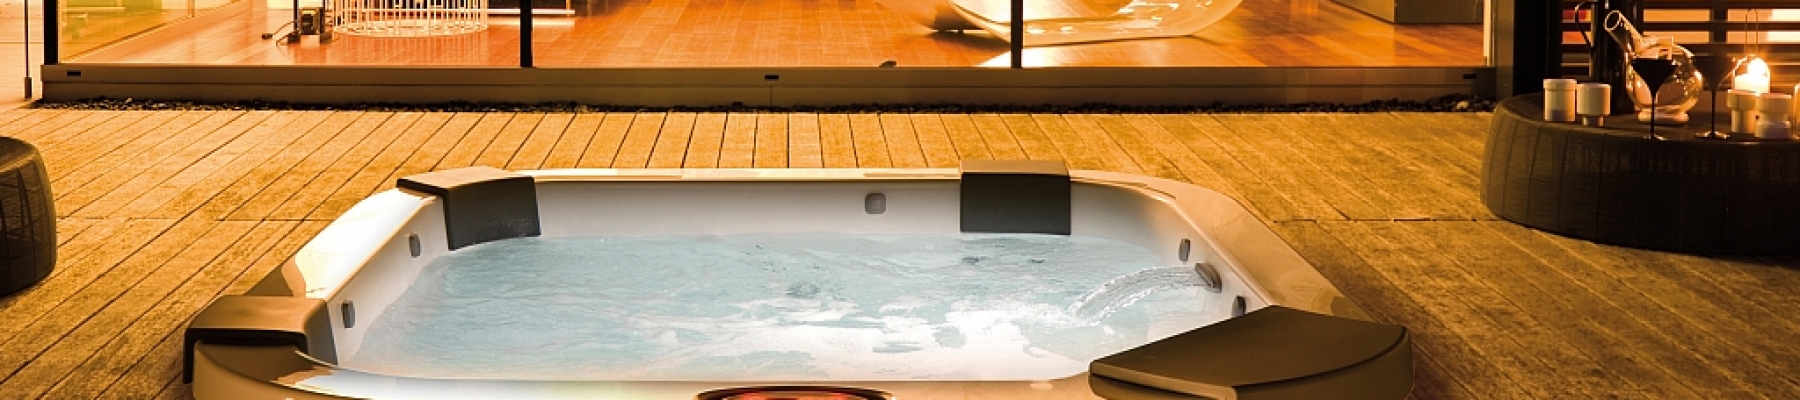 Using hydrotherapy to rehabilitate injured muscles and relieve pain